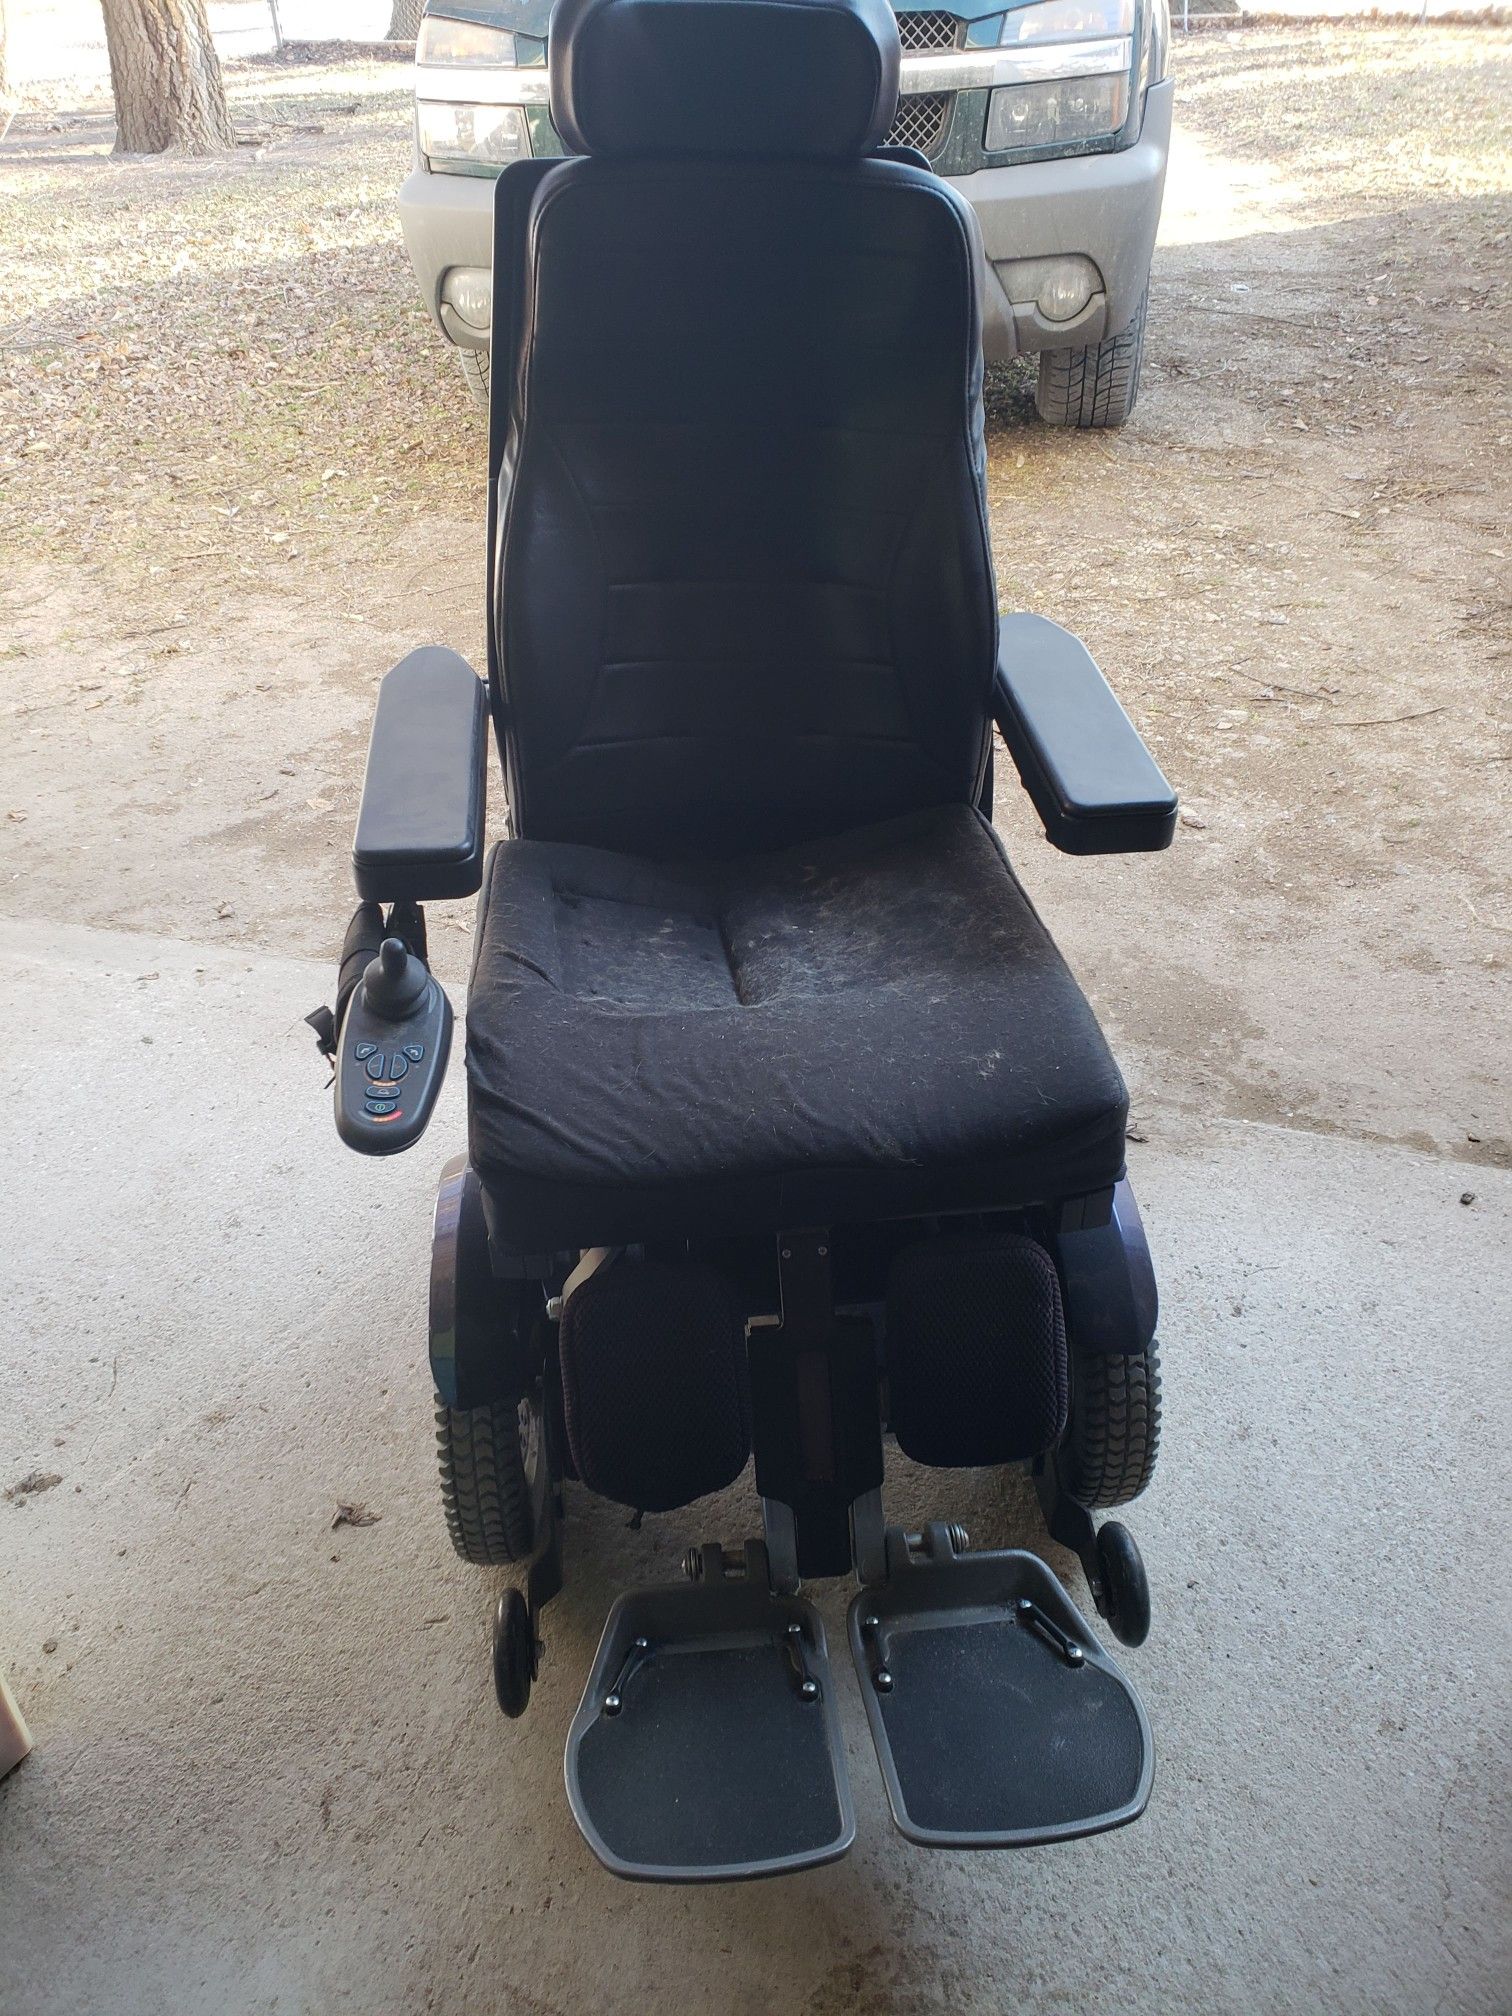 Power chair payment only through PayPal.